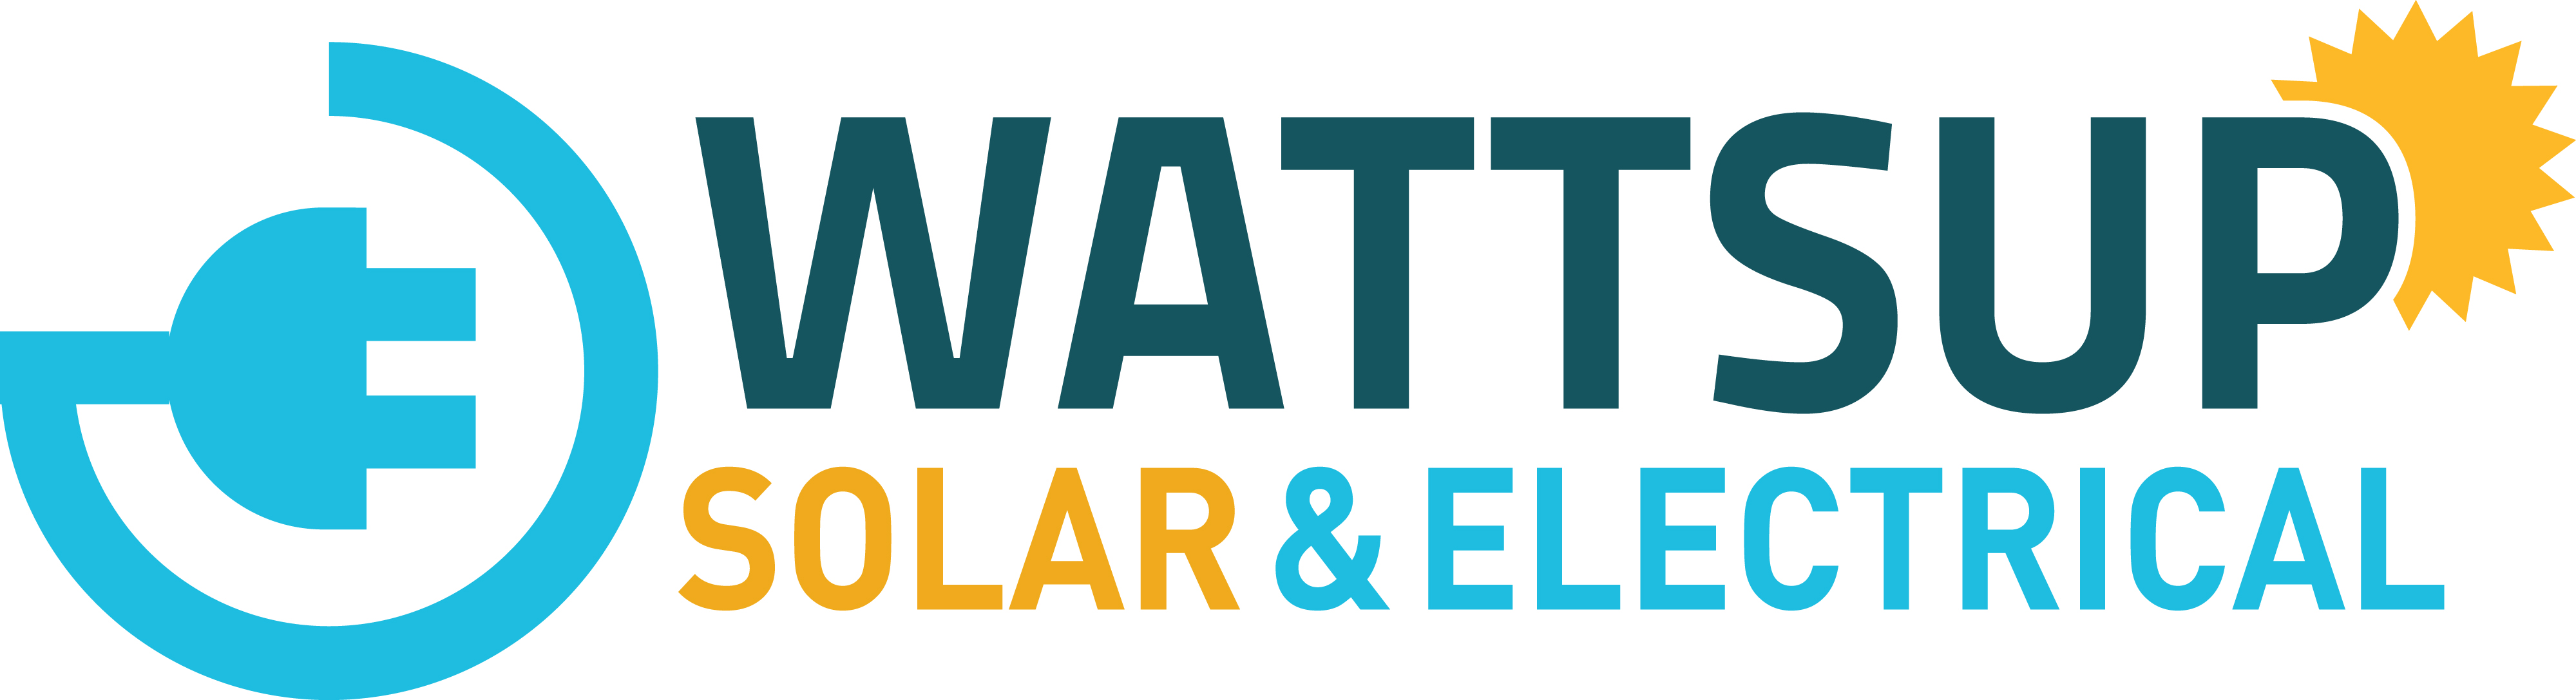 Watts Up Electrical and Solar